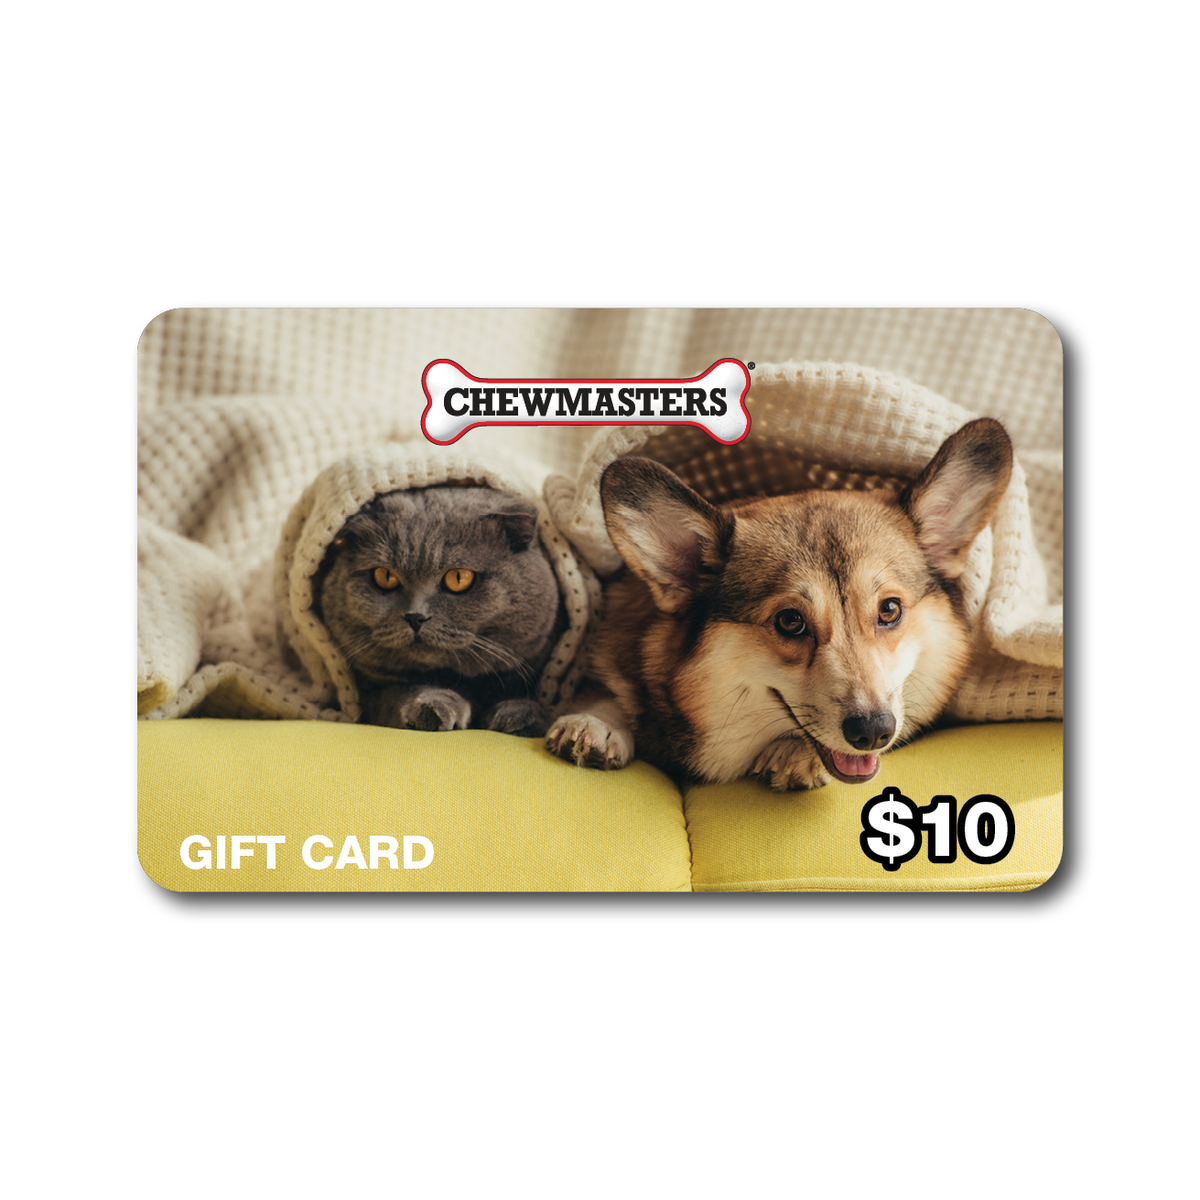 Chewmasters Gift Card